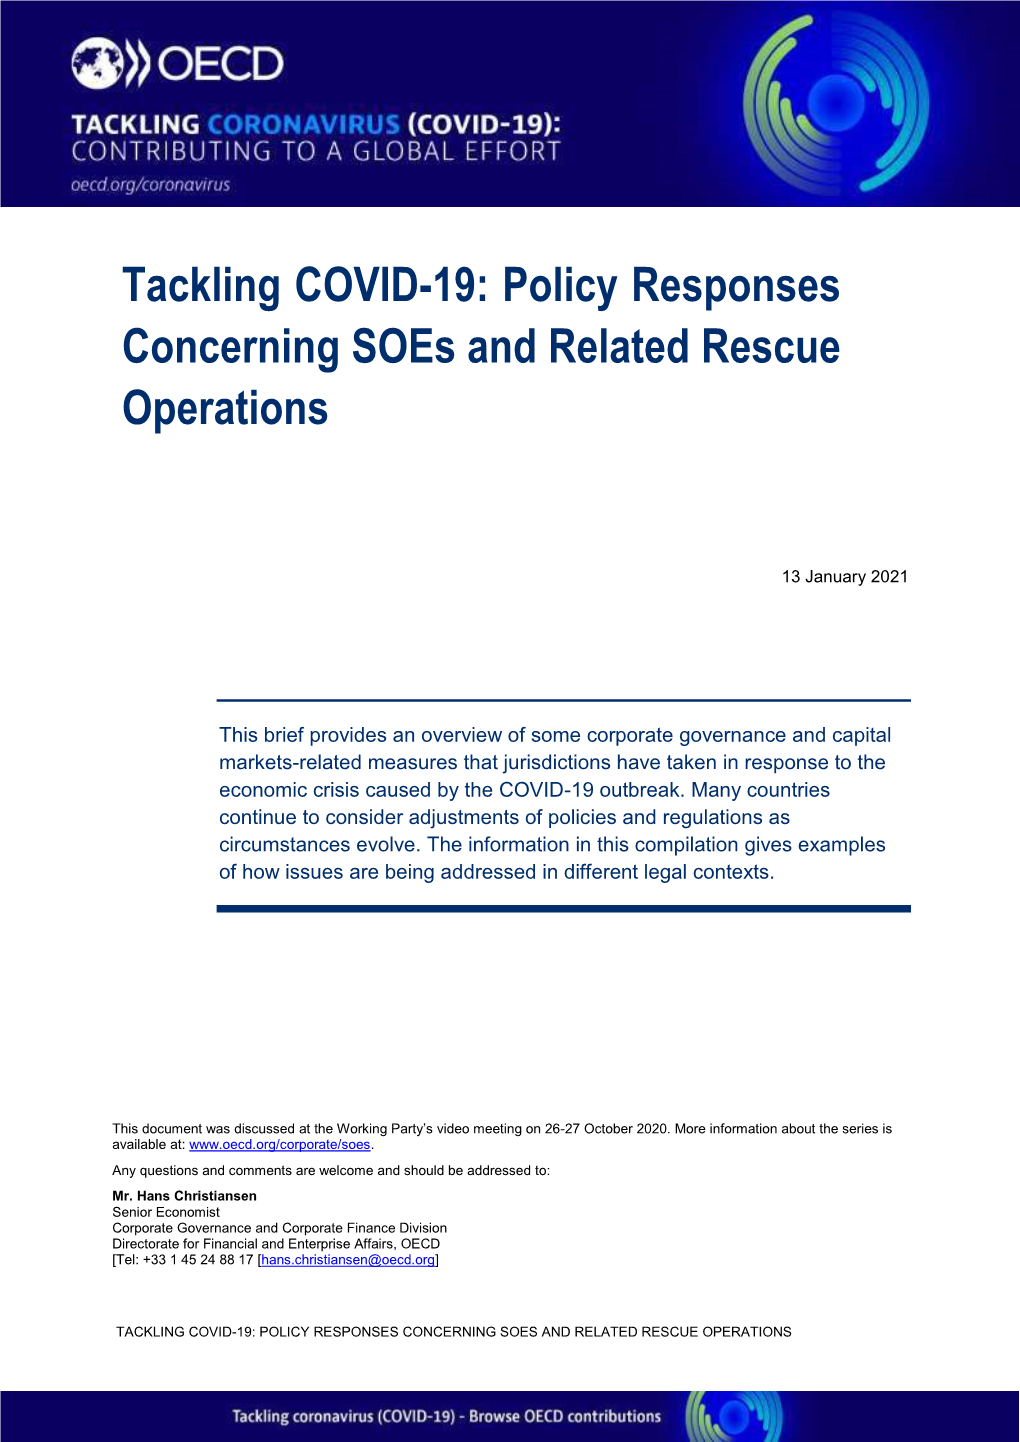 Tackling COVID-19: Policy Responses Concerning Soes and Related Rescue Operations